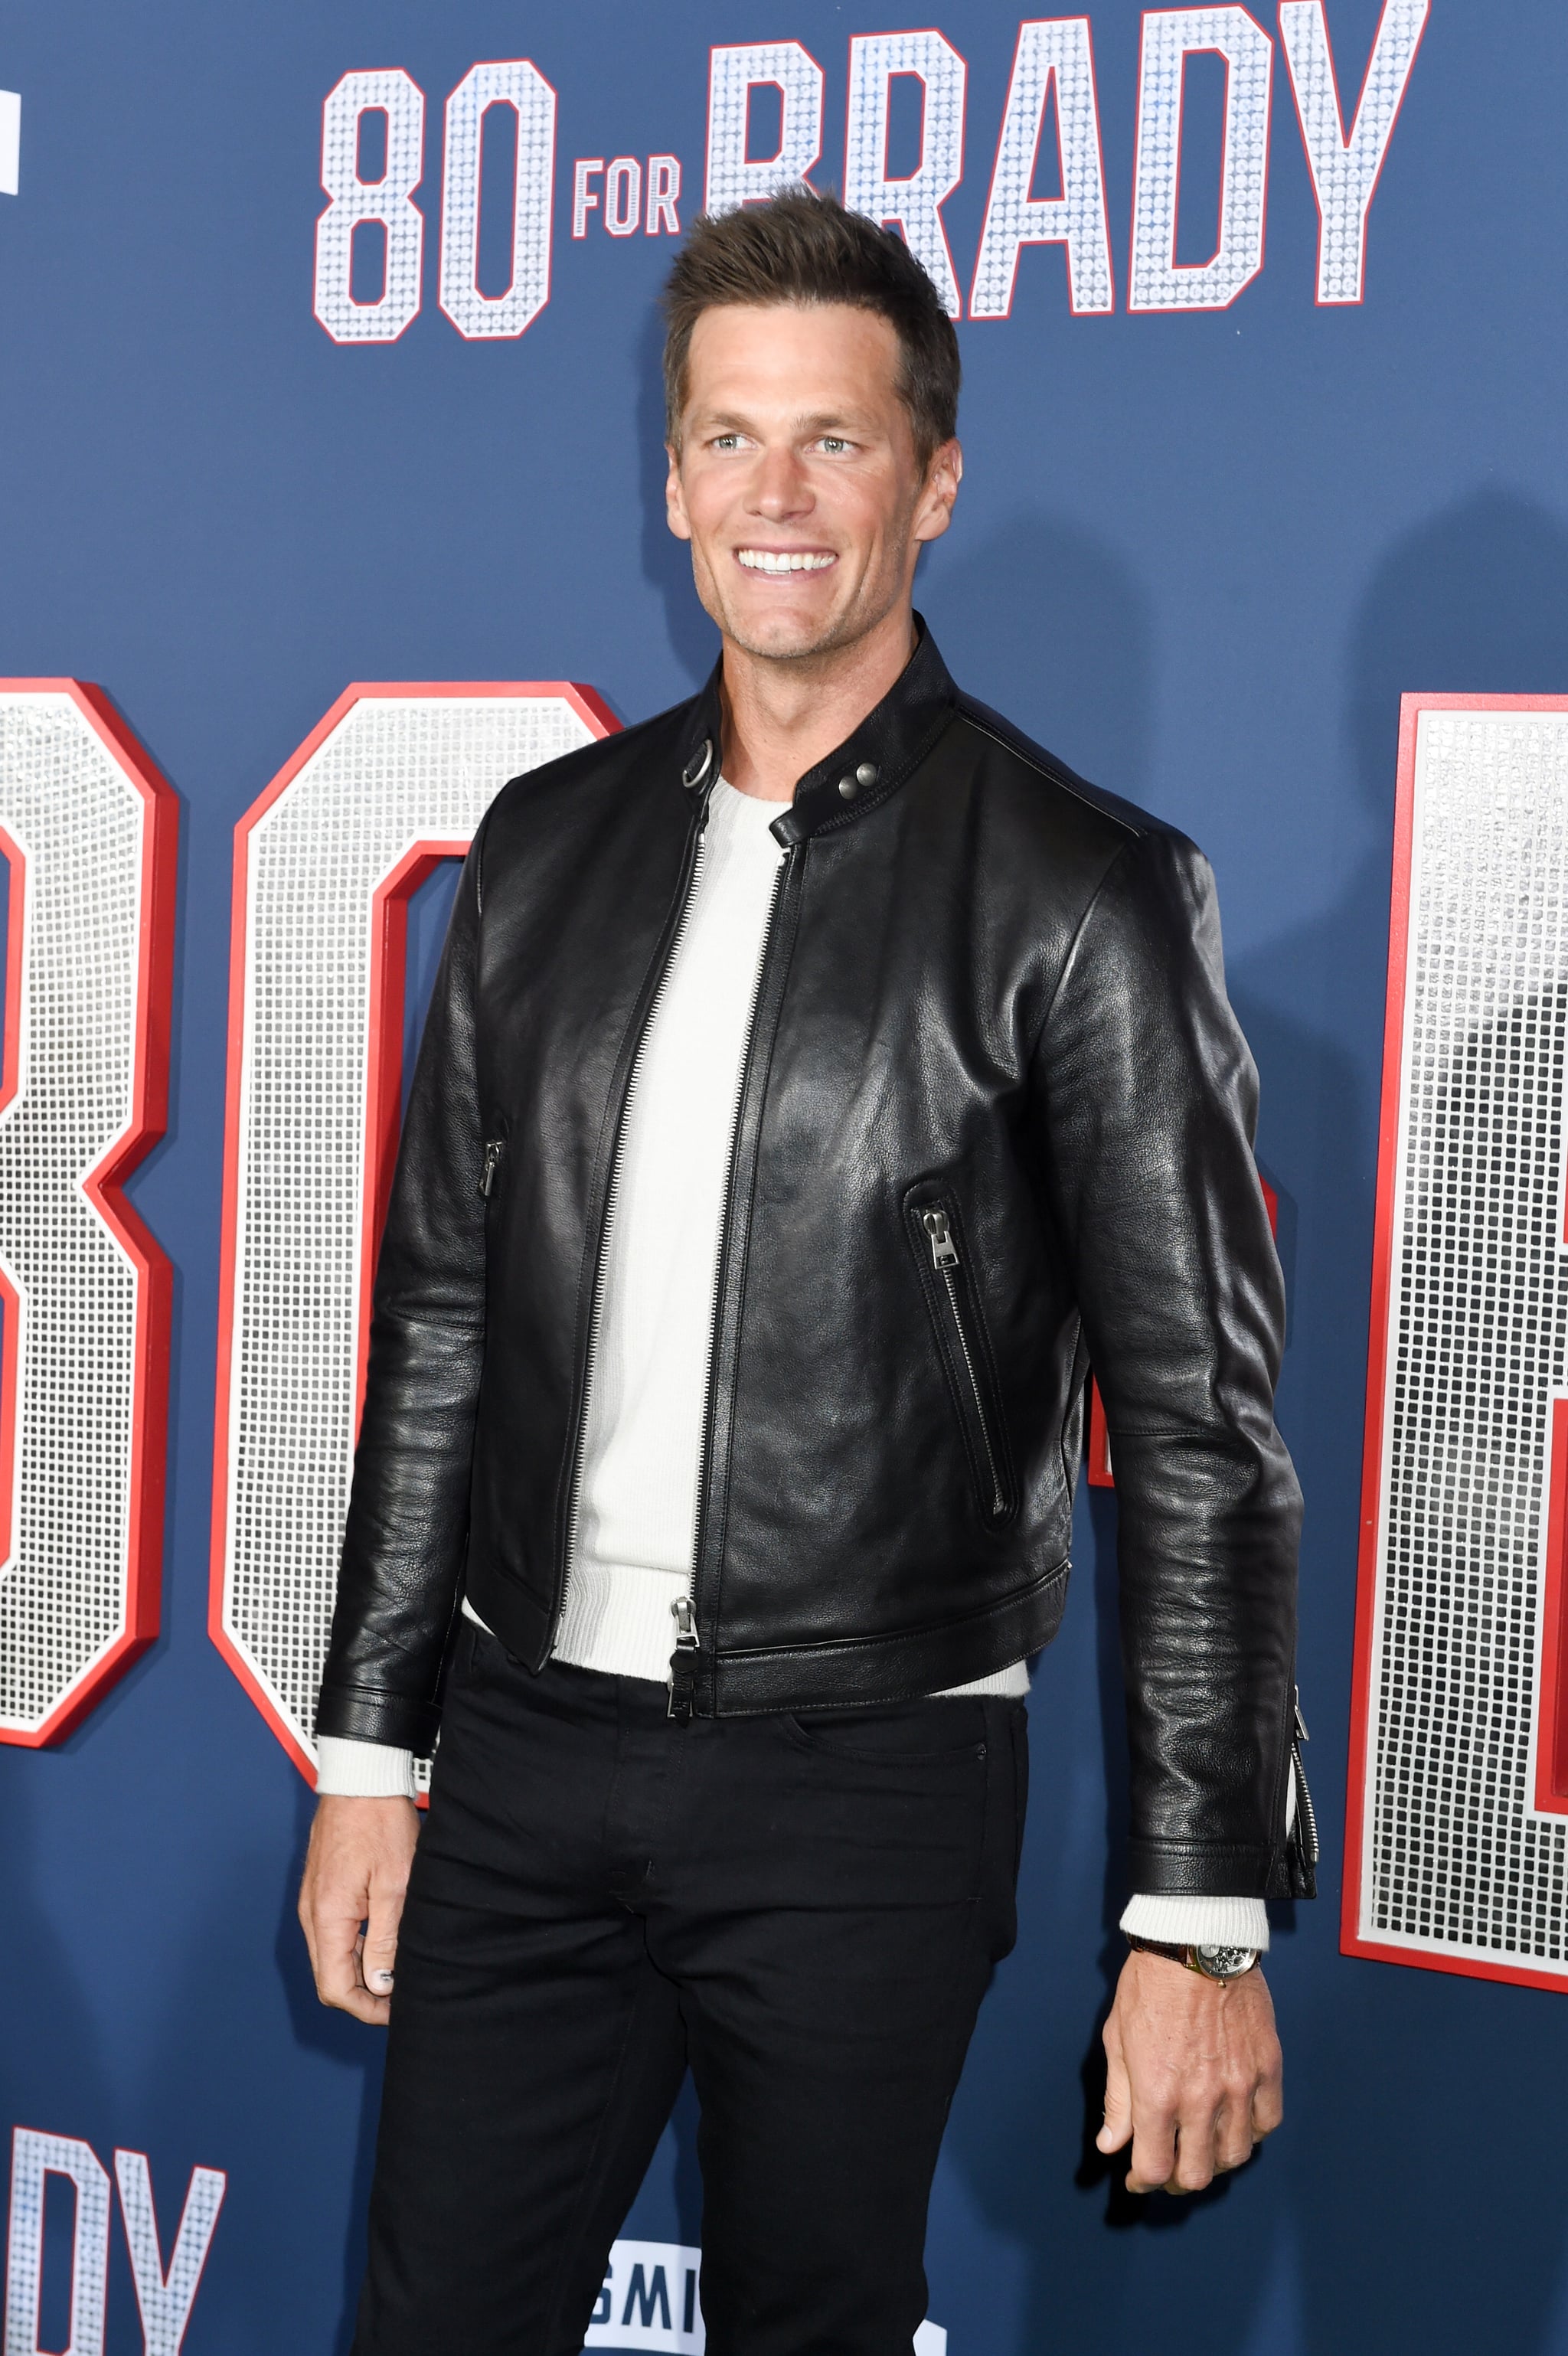 Tom Brady Dons Leather at 80 for Brady Premiere & Announces